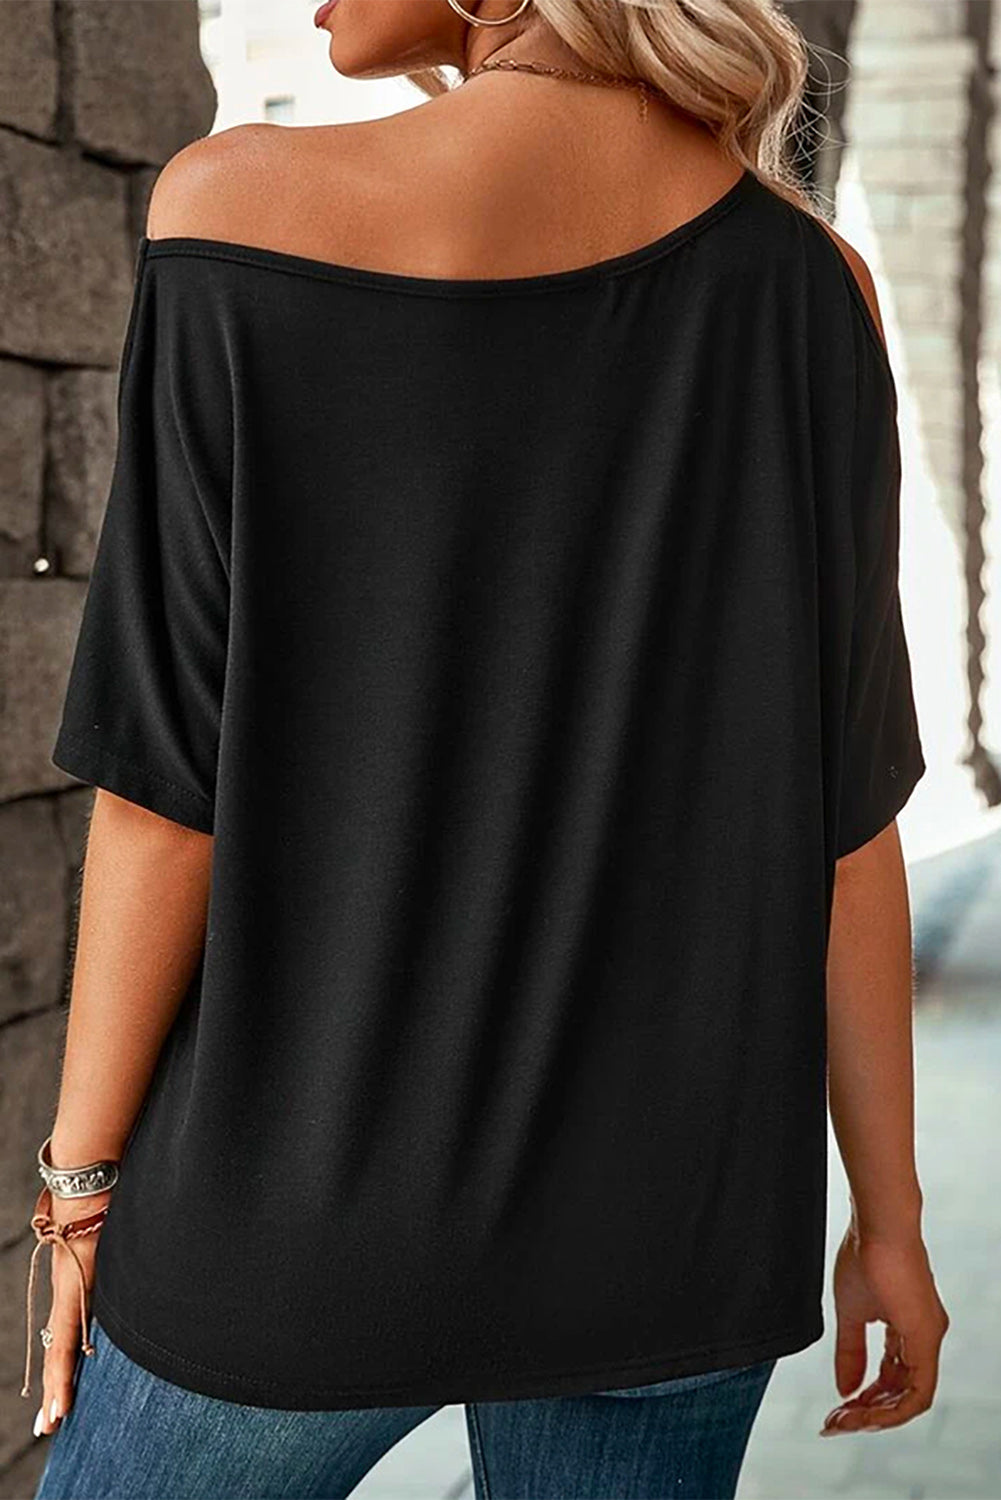 Black Casual One Cold Shoulder Loose T-Shirt